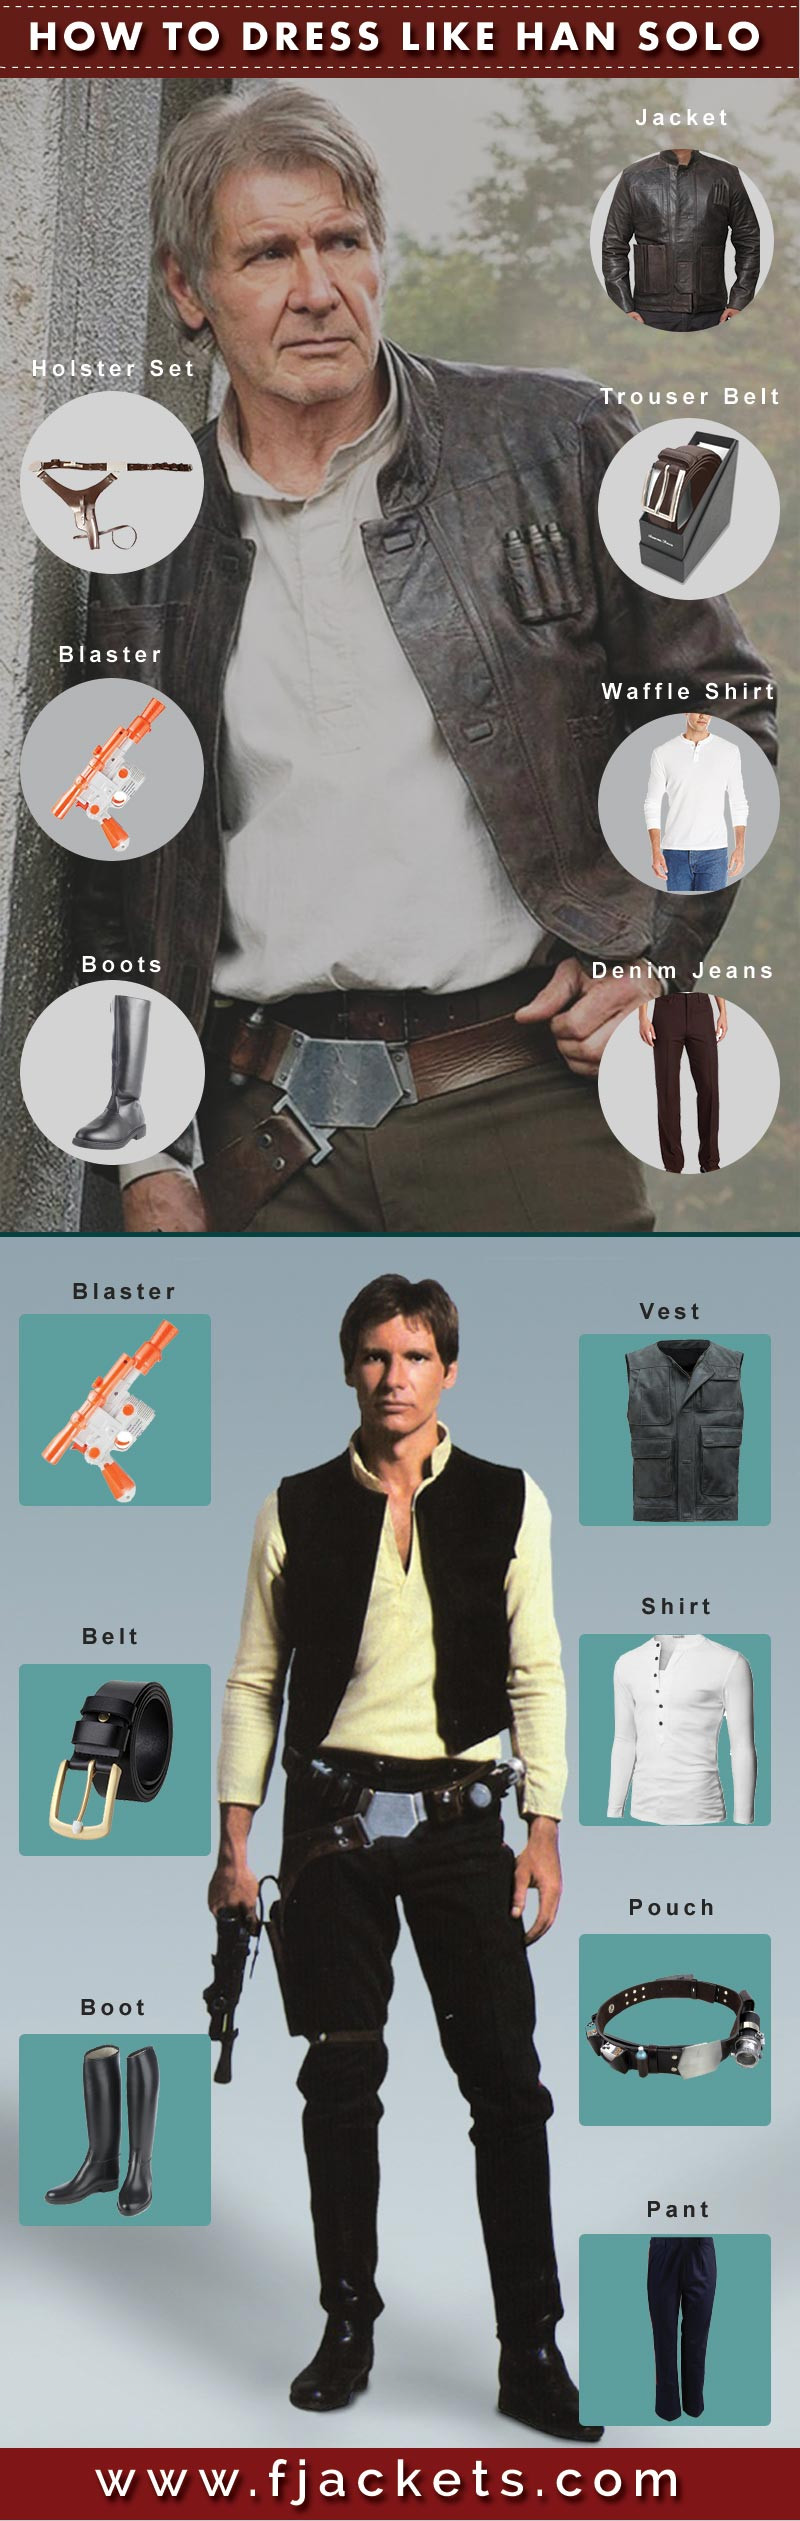 Han Solo Costume DIY
 The Best Ever DIY Han Solo Costume Guide